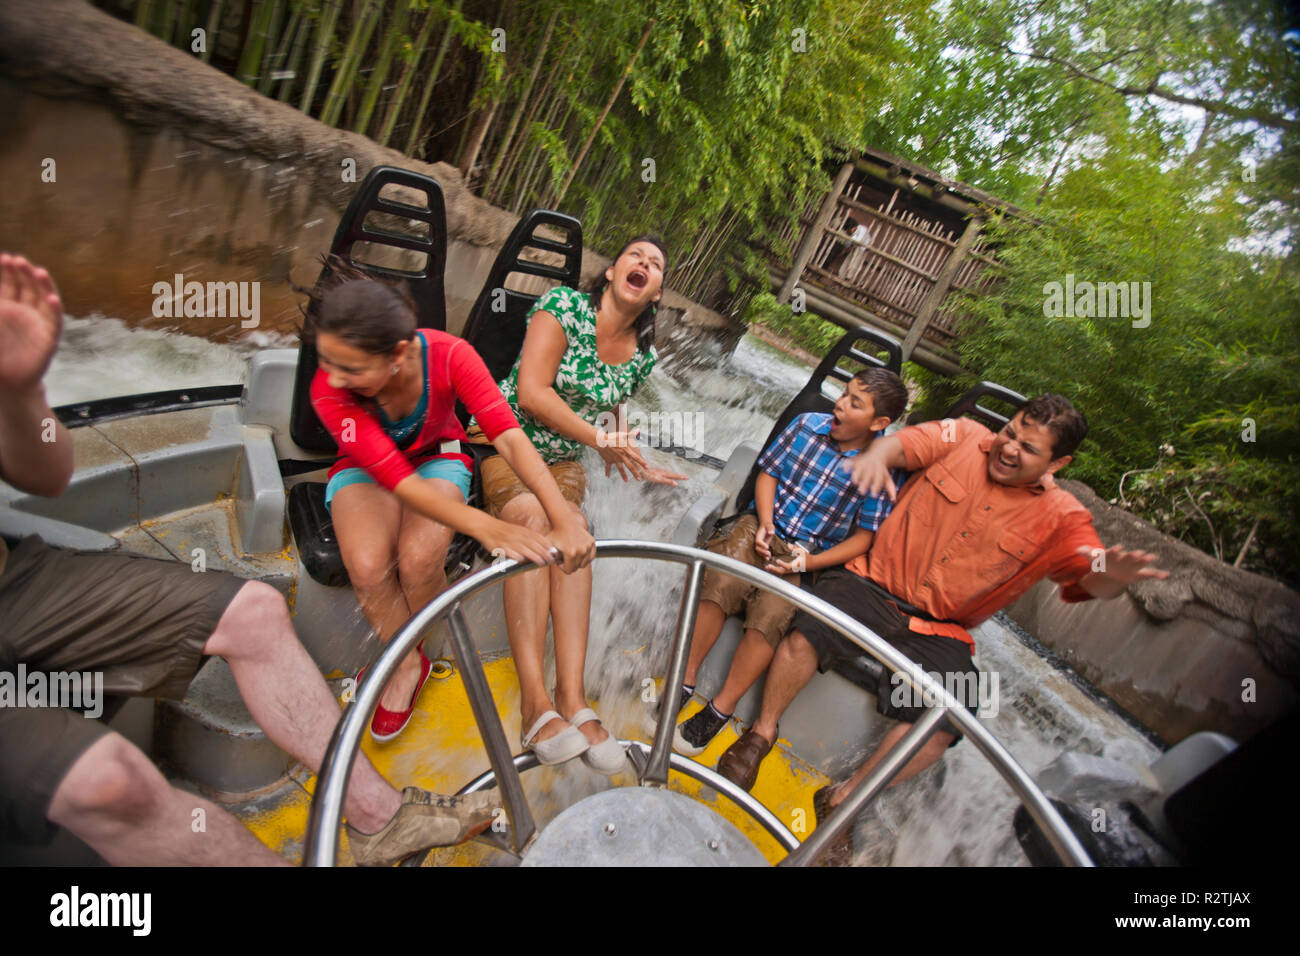 Smiling family riding on a water ride at an amusement park. Stock Photo